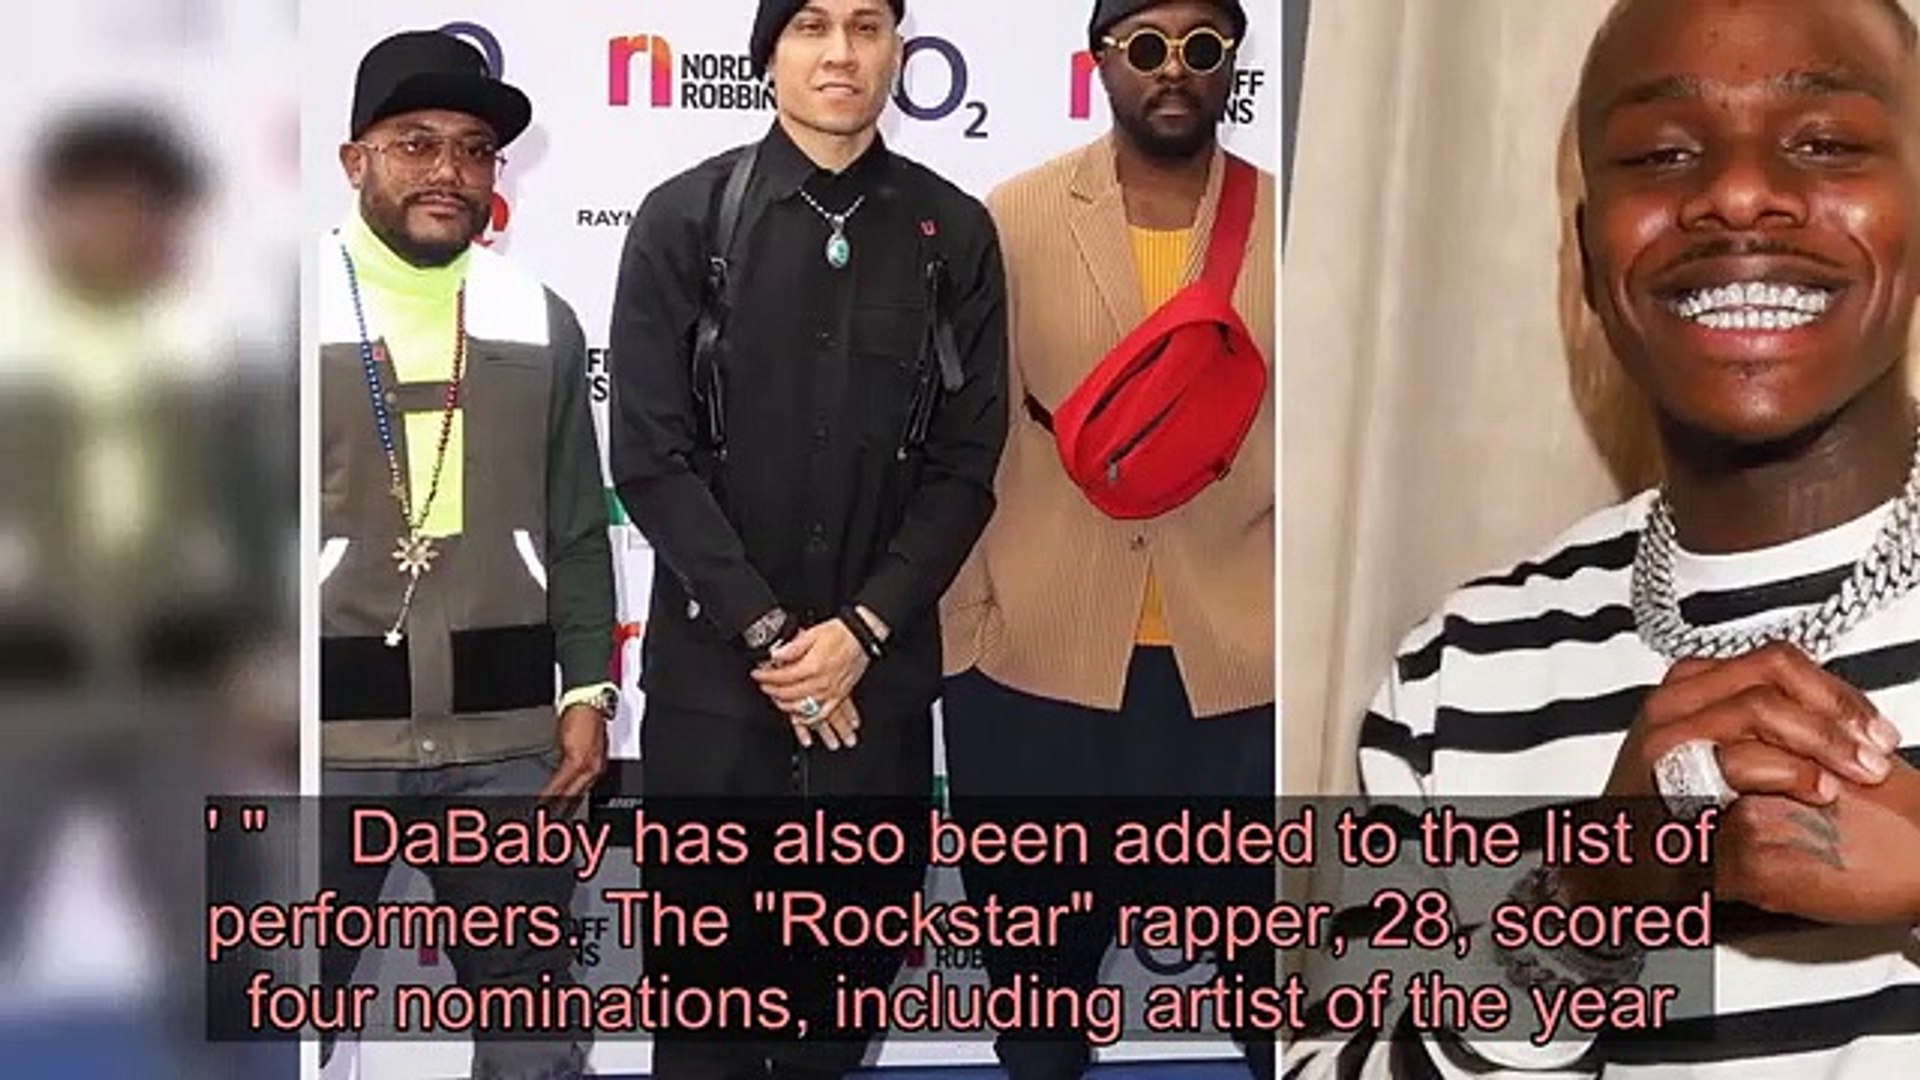 Black Eyed Peas and DaBaby Set to Perform at 2020 MTV Video Music Awards